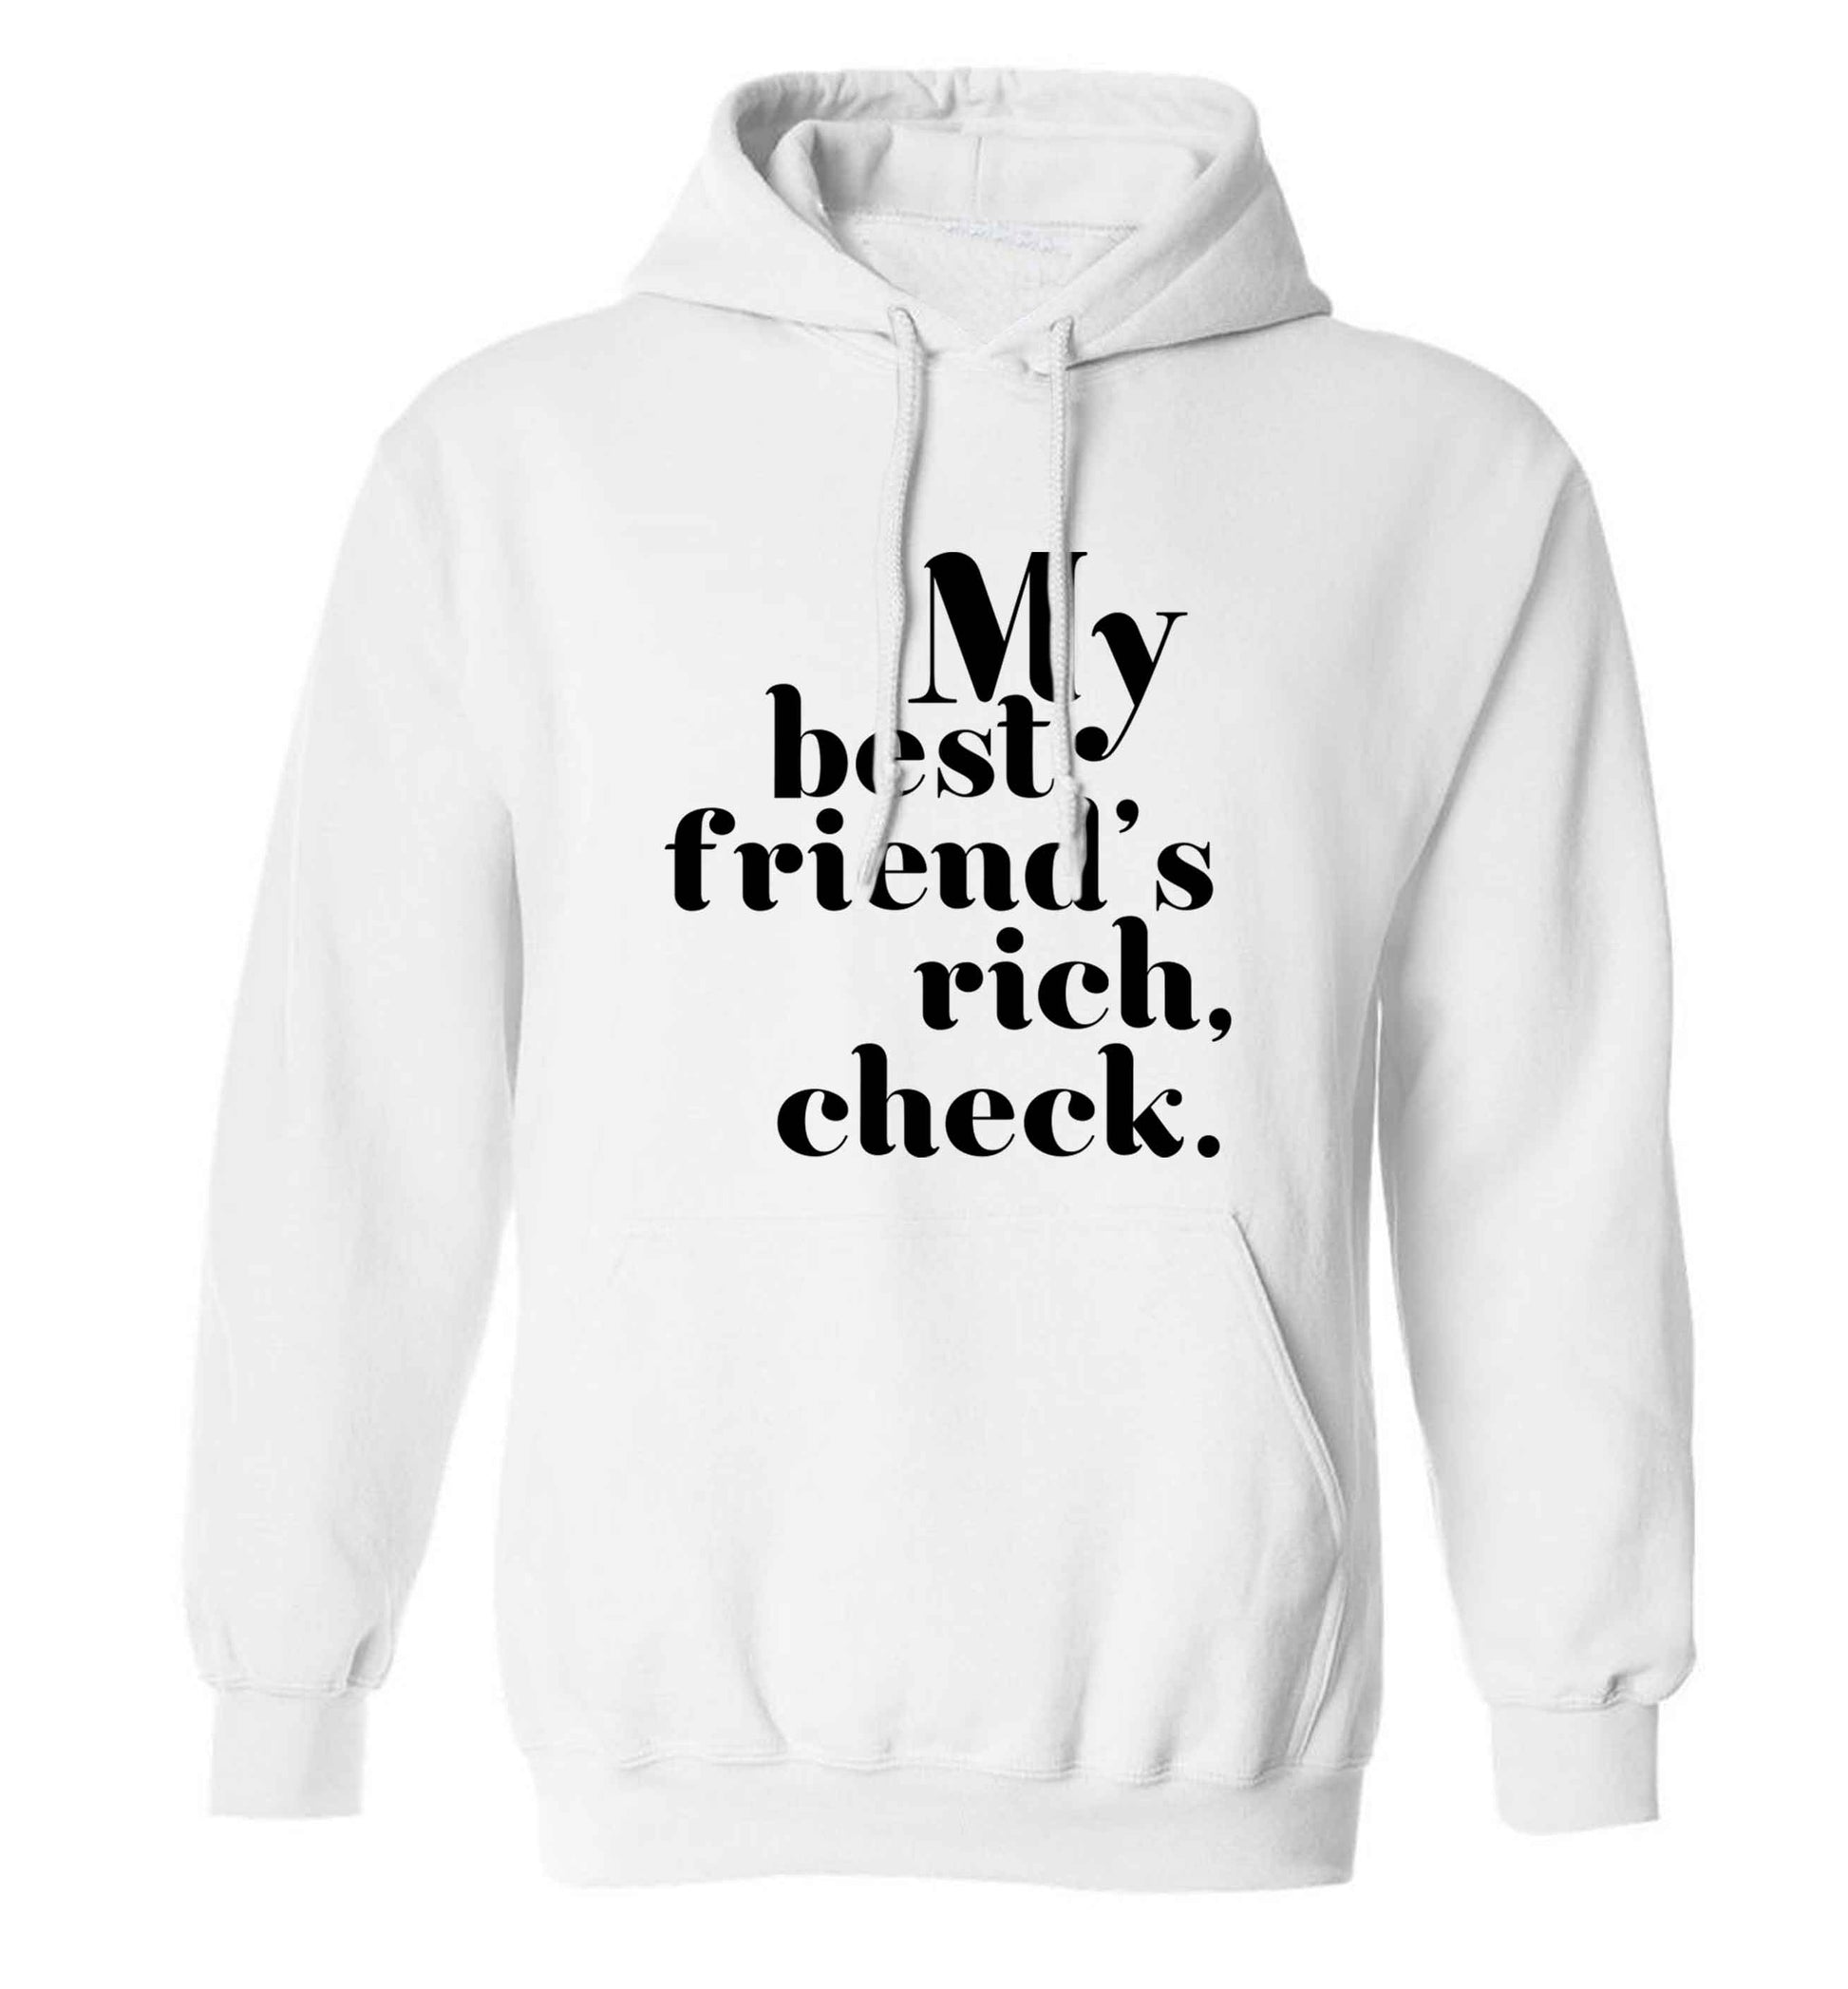 Got a rich best friend? Why not ask them to get you this, just let us  know and we'll tripple the price ;)  adults unisex white hoodie 2XL